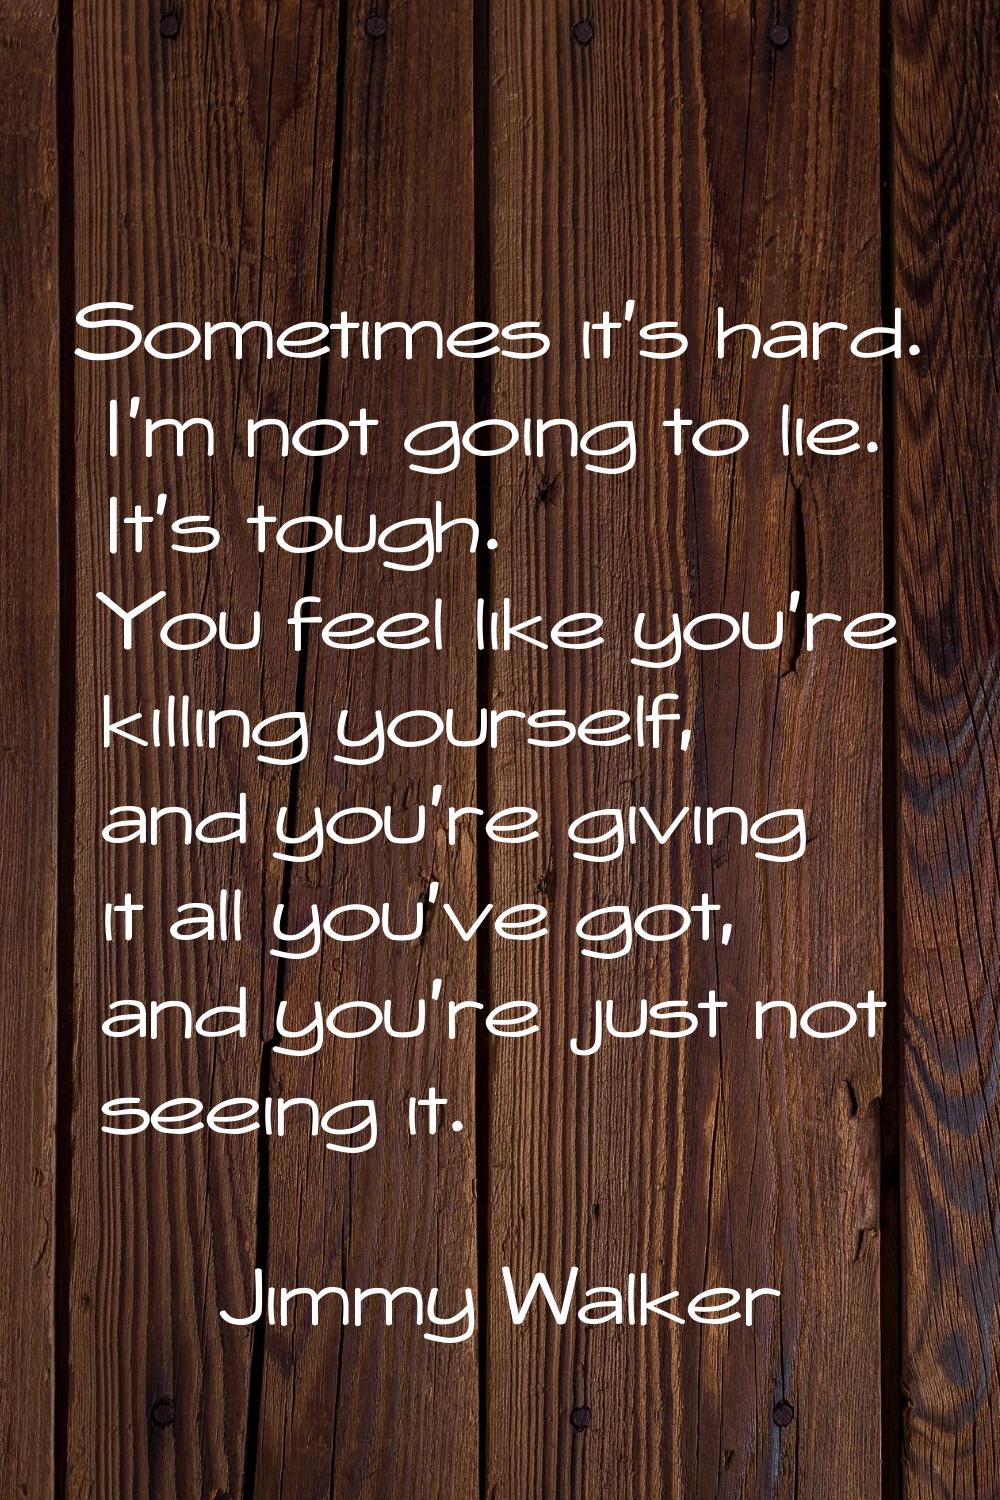 Sometimes it's hard. I'm not going to lie. It's tough. You feel like you're killing yourself, and y